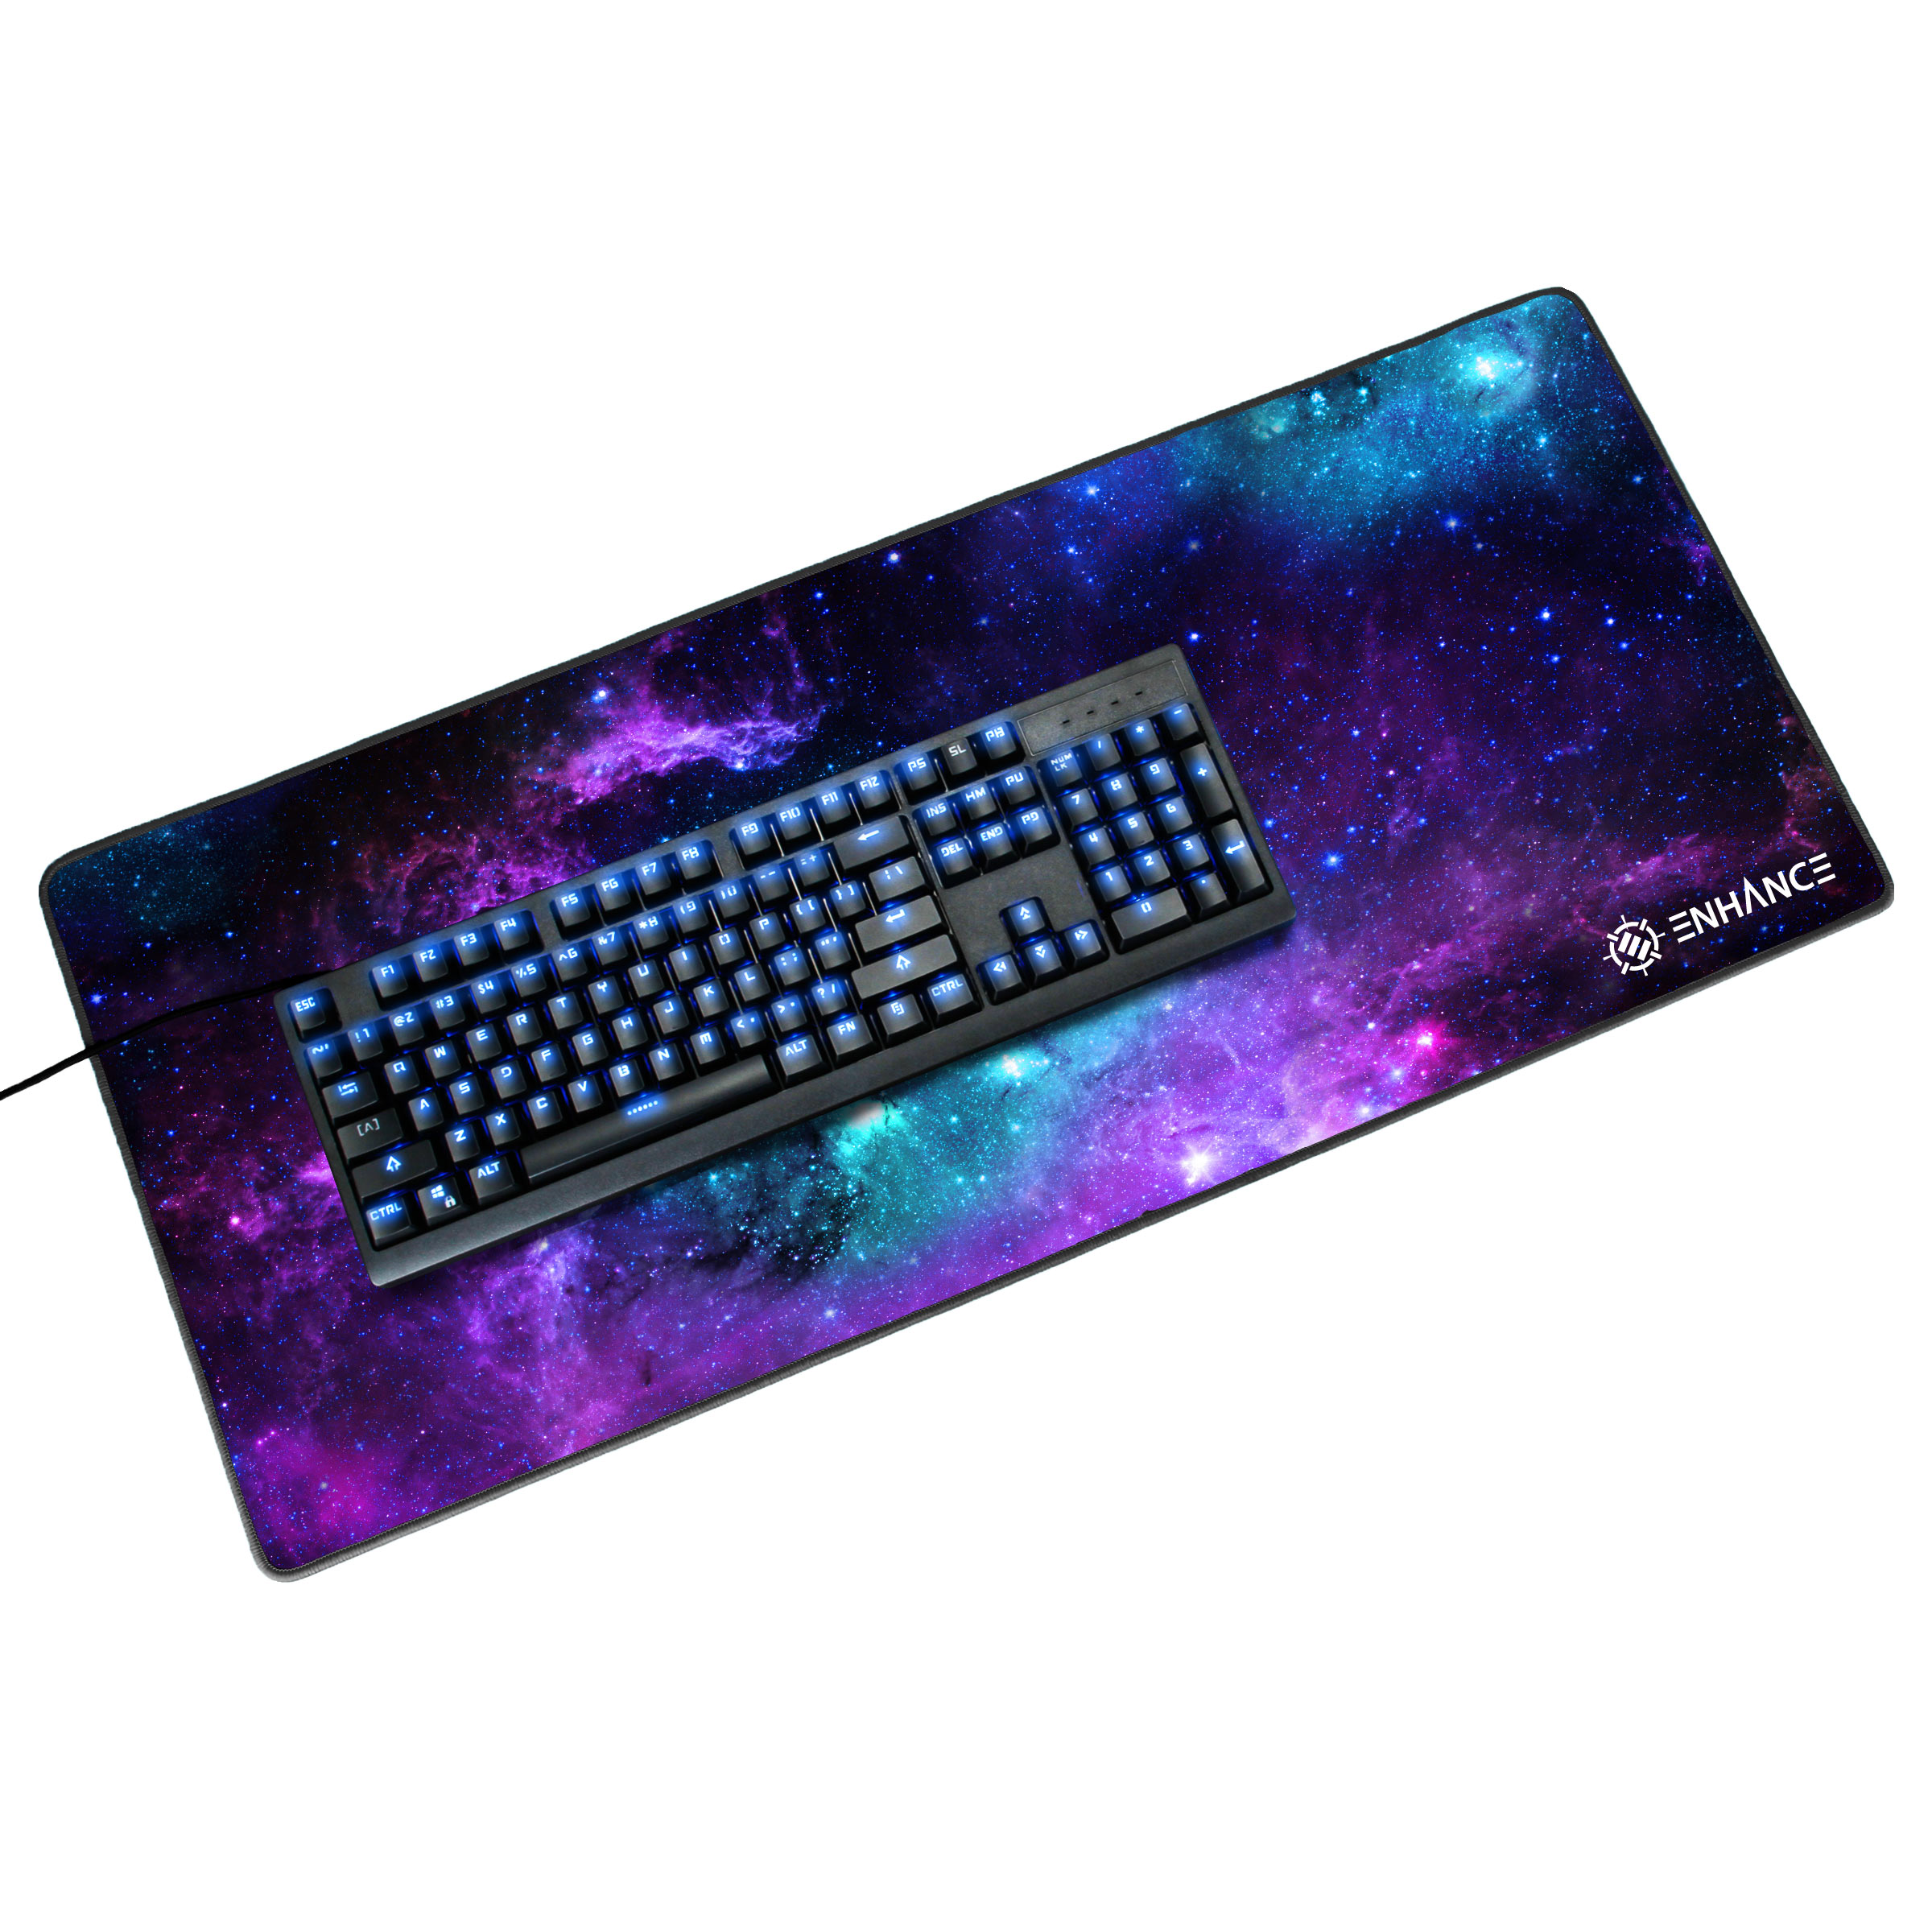 ENHANCE Extended Large Gaming Mouse Pad - XL Mouse Mat (31.5" x 13.75") Anti-Fray Stitching for Professional eSports with Low-Friction Tracking Surface and Non-Slip Backing - Galaxy - image 4 of 8